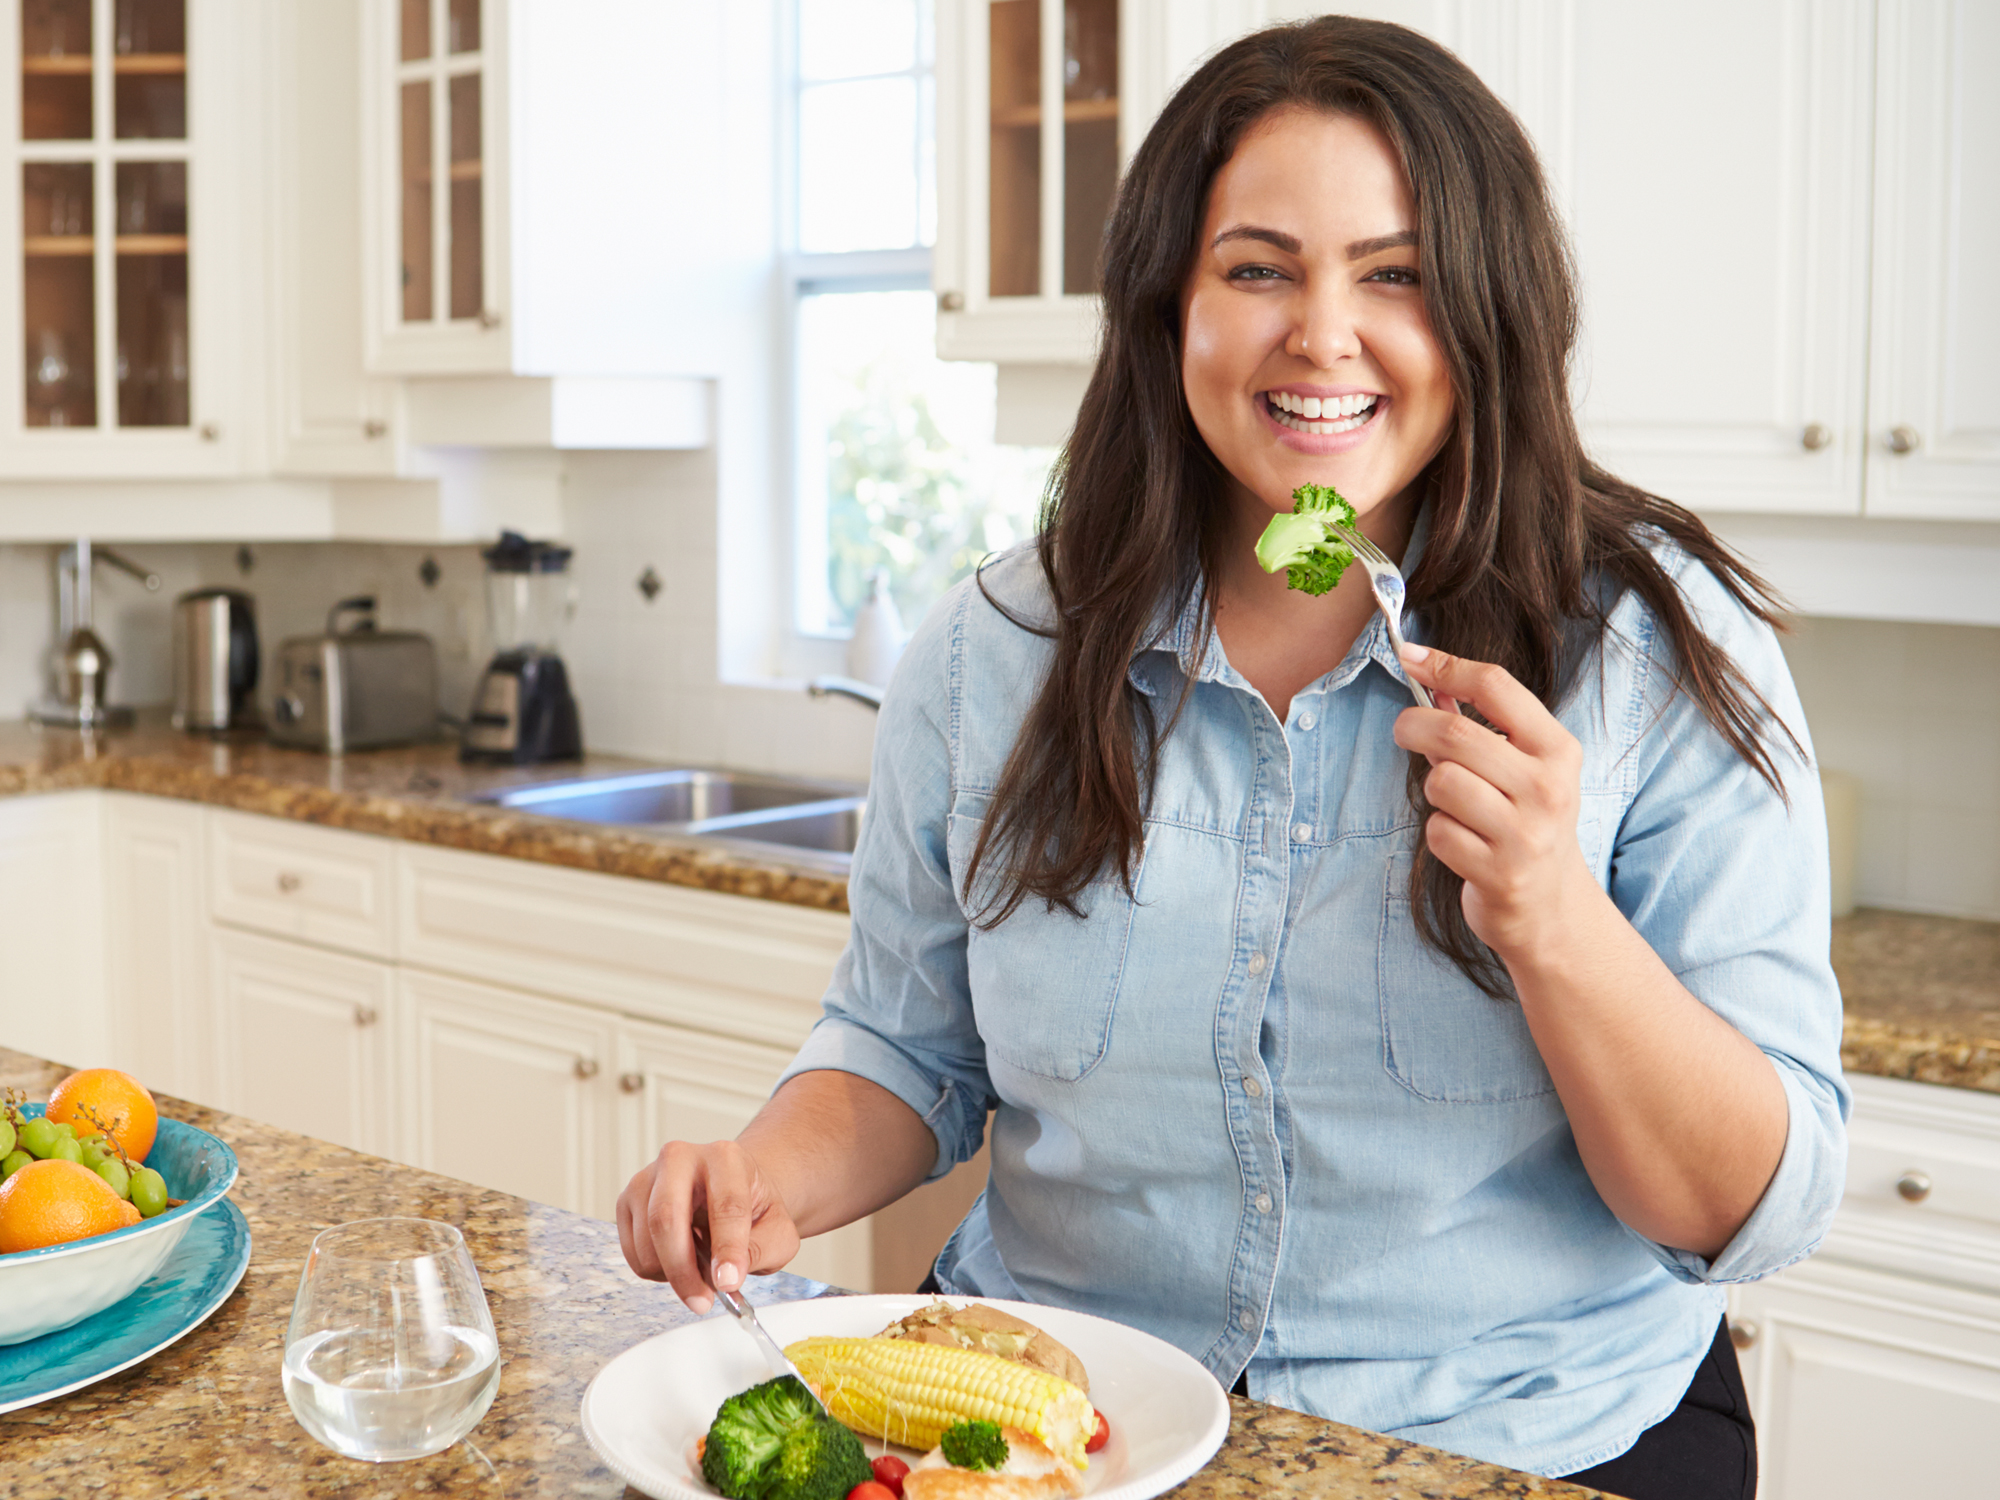 How a balanced diet beats weight loss for boosting happiness